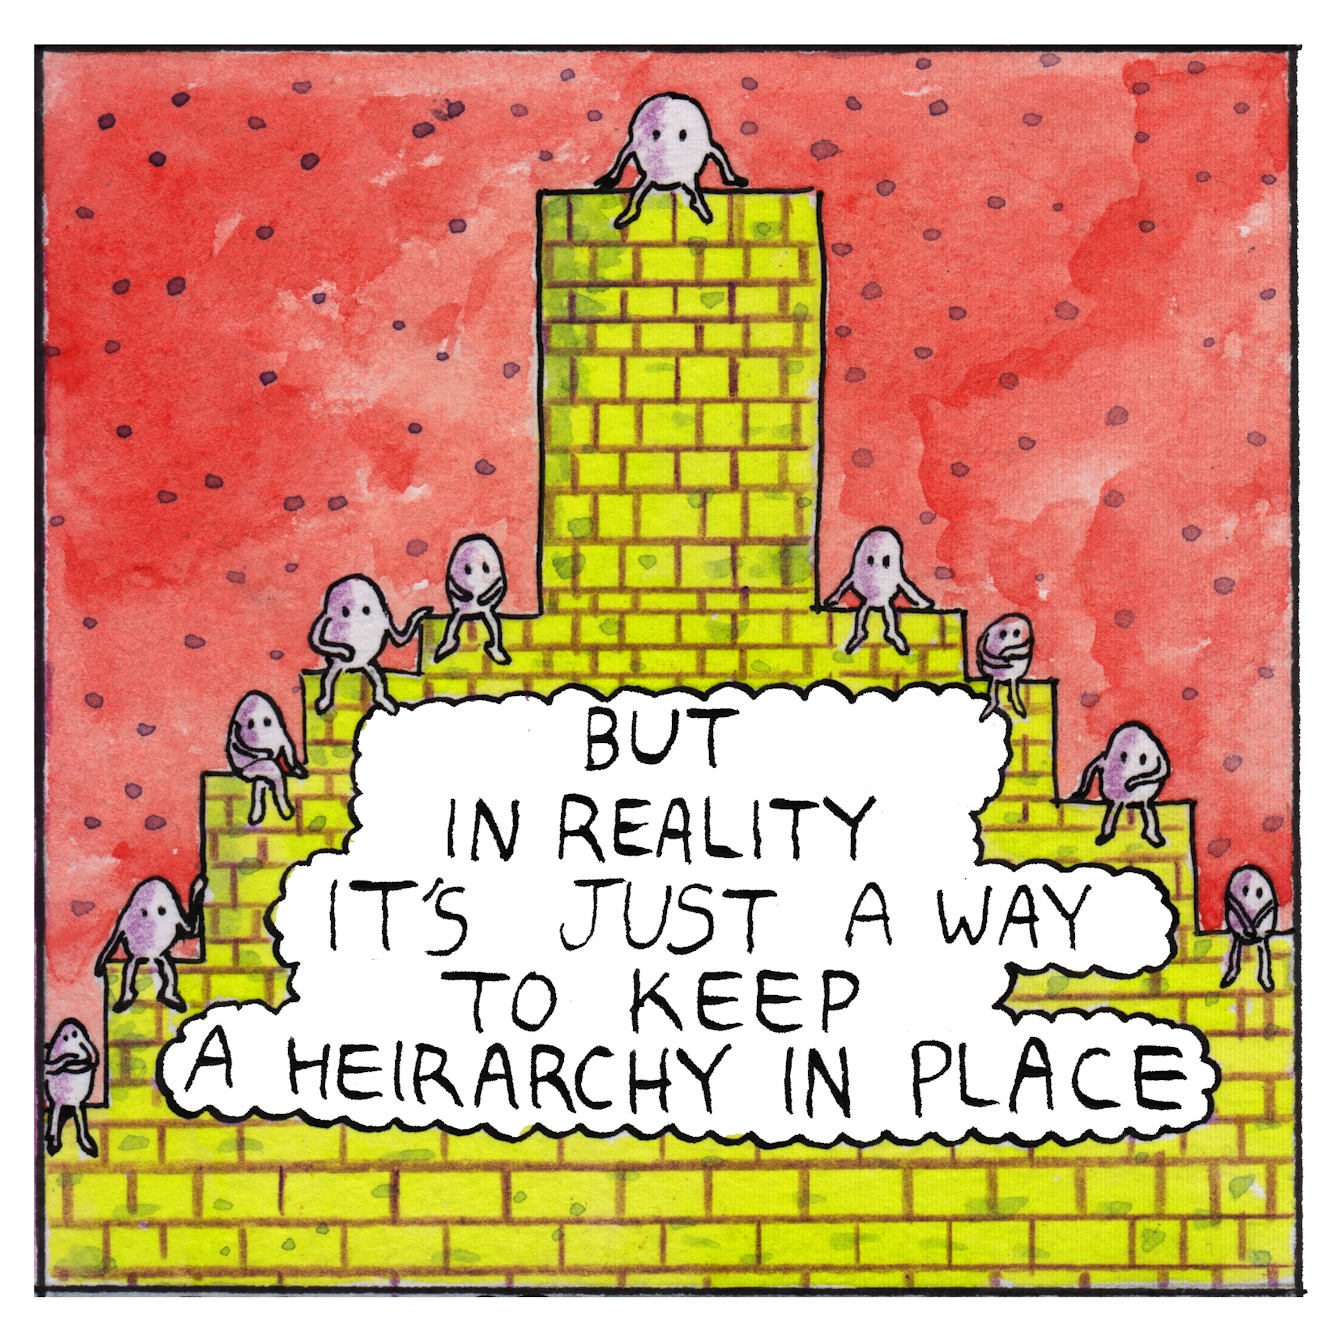 Panel 4 of the comic 'Egg Inc.': A yellow brick pyramid structure with stepped sides and a tall flat-topped tower fills most of the panel, against a red backgroudn with small grey dots. Small white egg-shaped characters with arms and legs and eyes site on each of he steps up the tower and one sits on top of the tower. The text bubble in the centre of the structure says "But in reality it's just a way to keep a heirarchy in place".